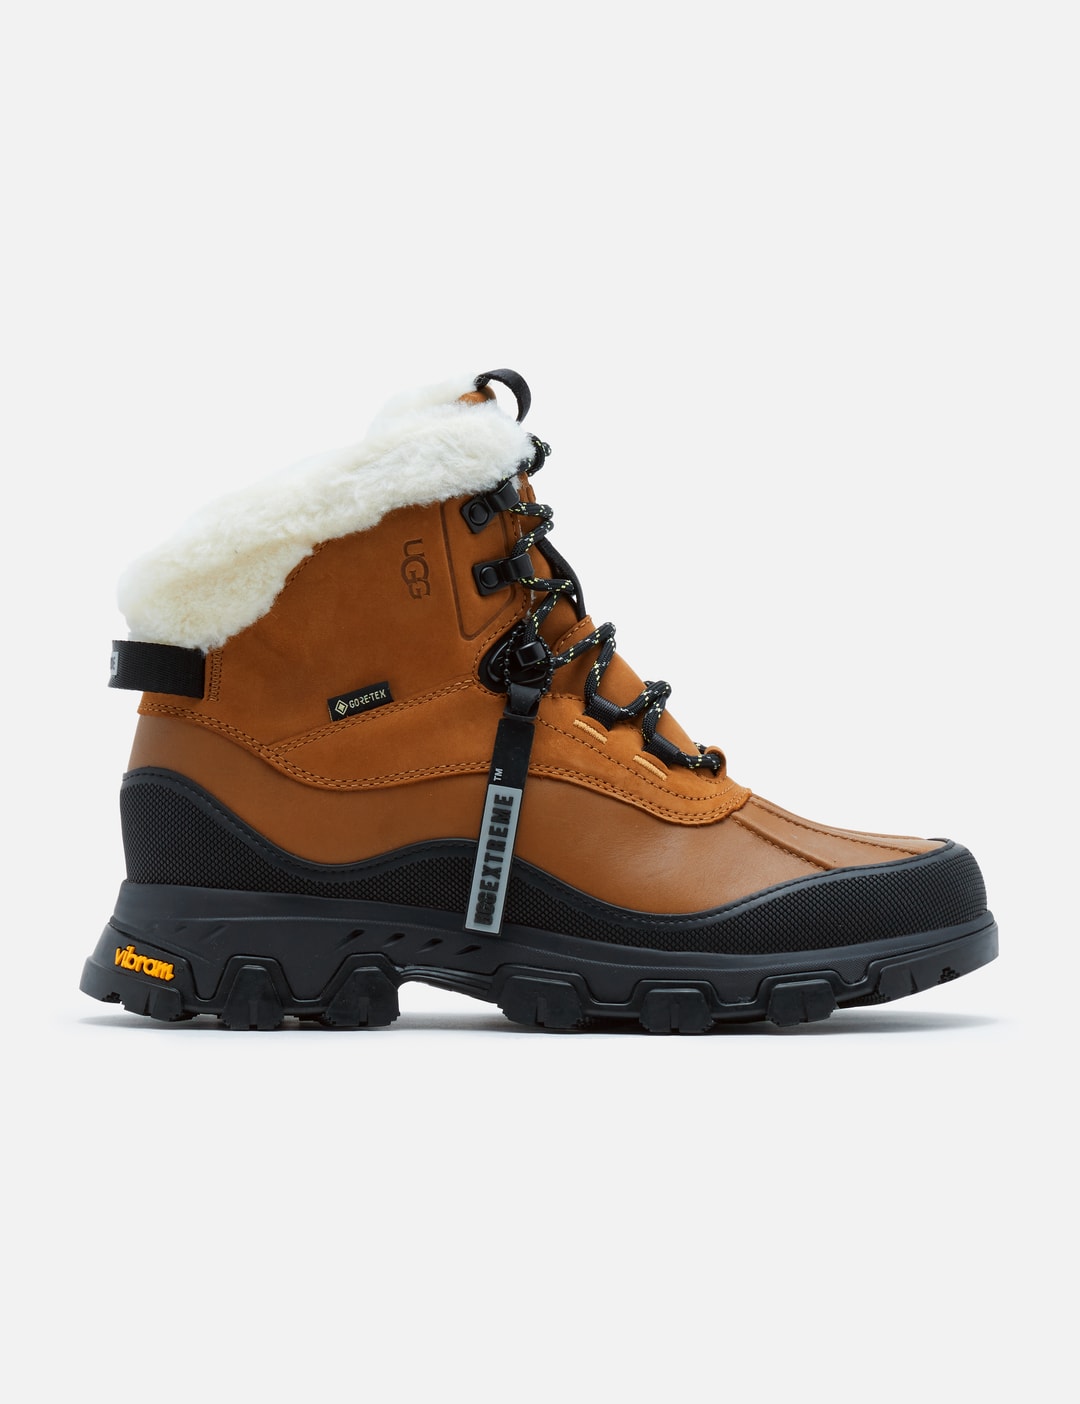 UGG - Adirondack Meridian Hiker Boots | HBX - Globally Curated Fashion ...